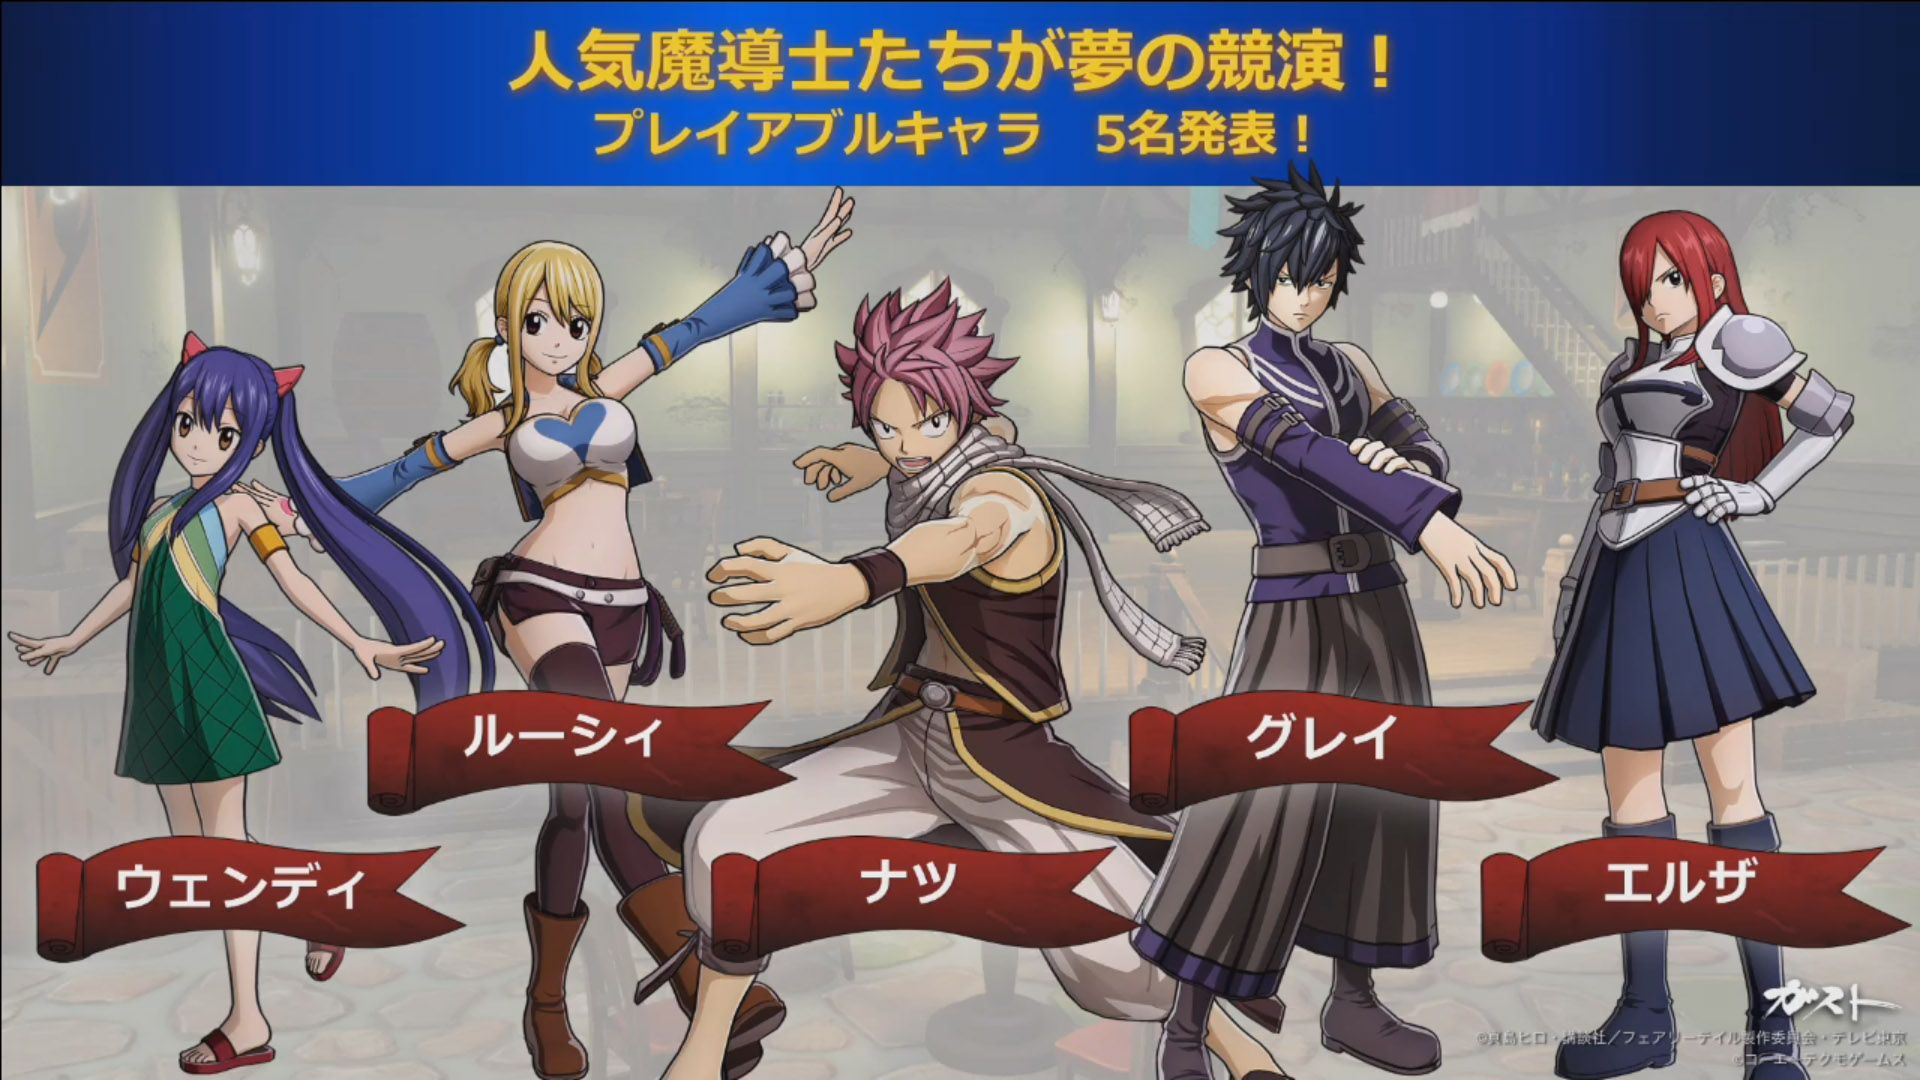 Fairy Tail TGS 2019 details, character trailer, and screenshots